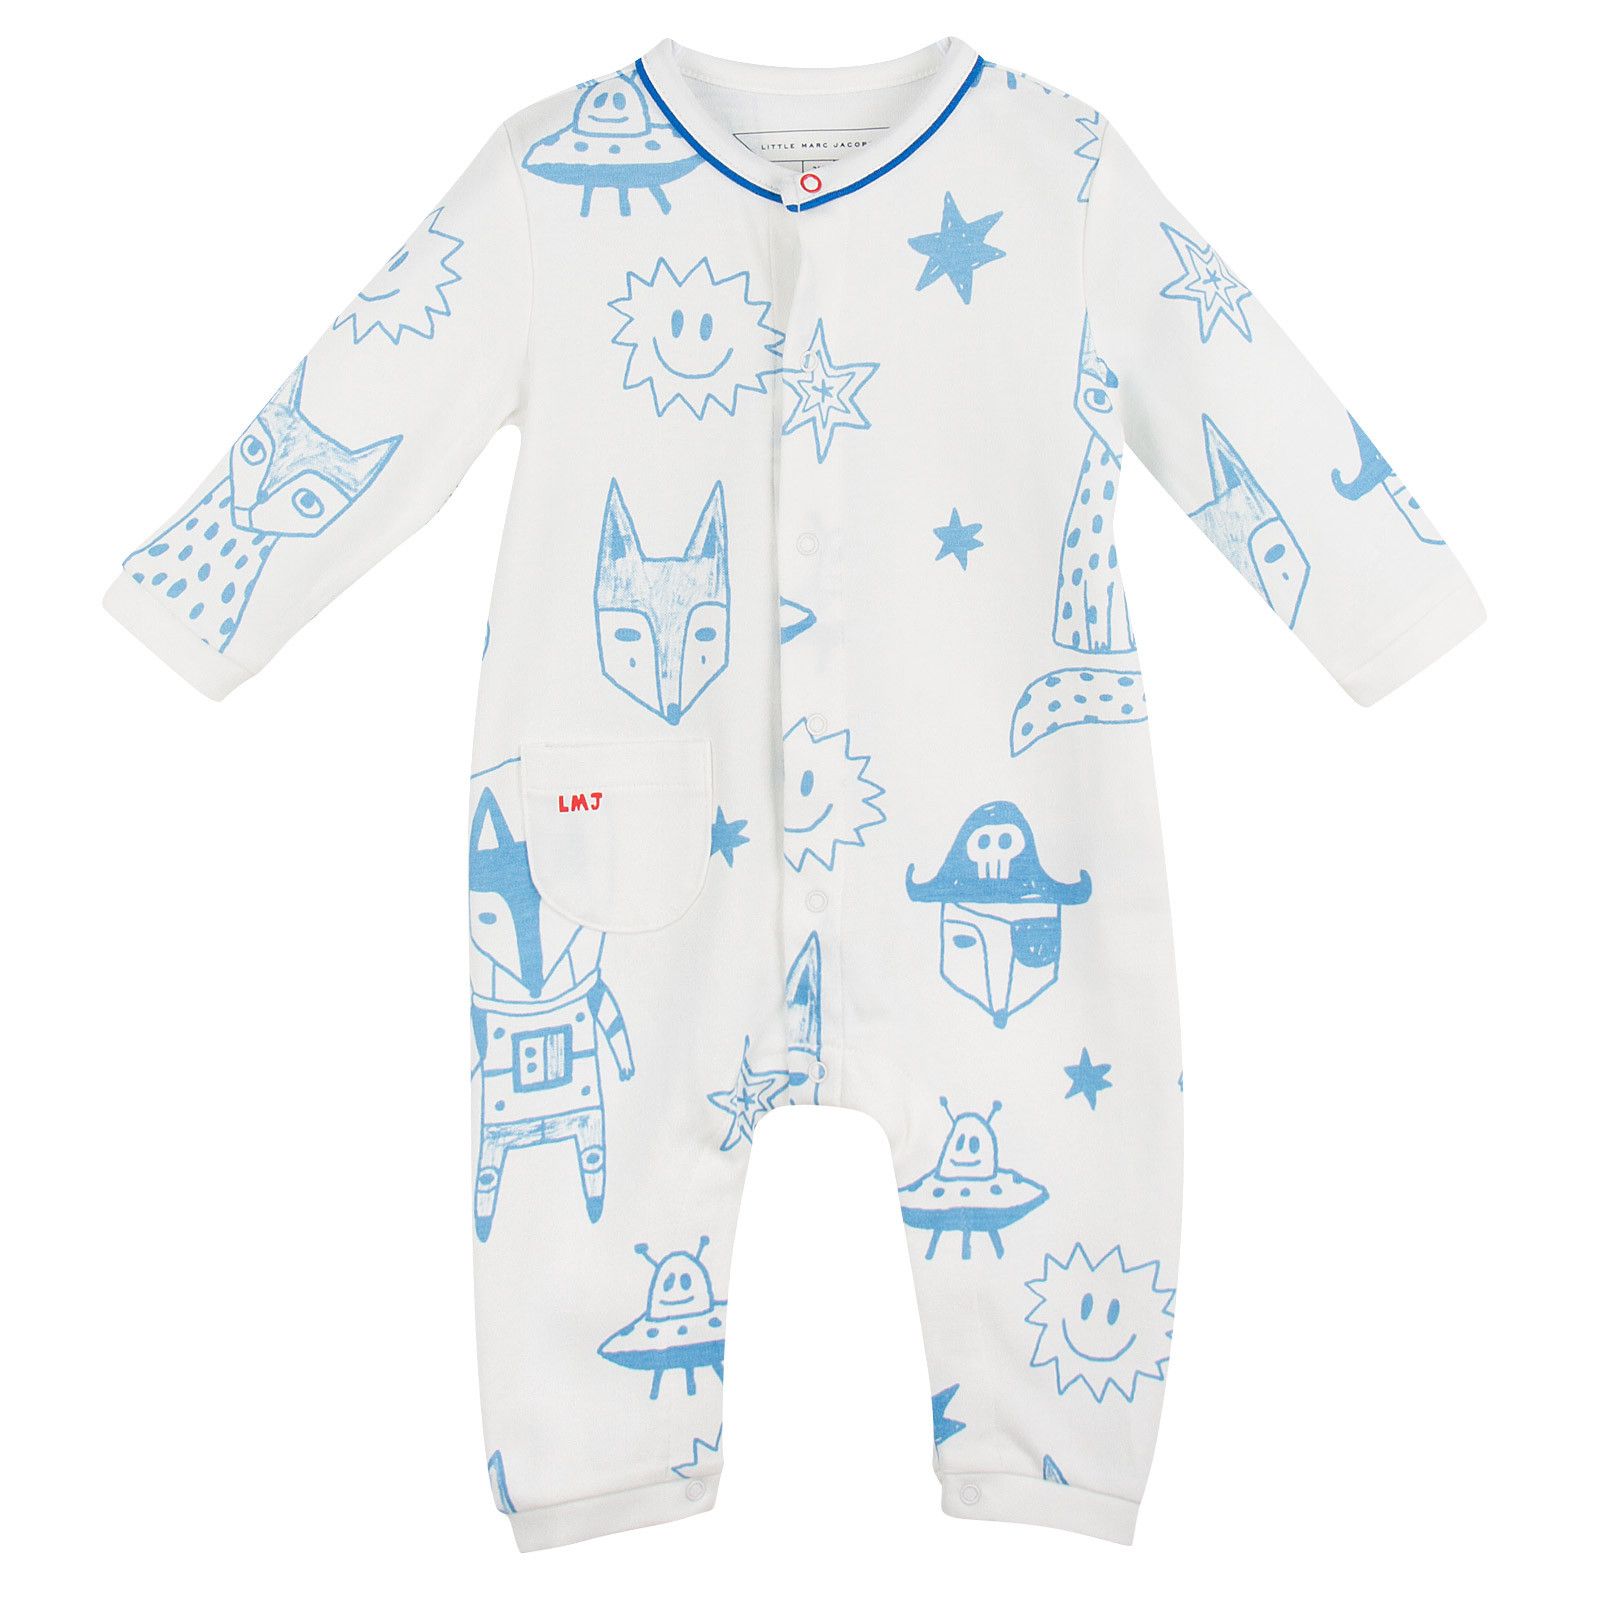 Baby Ivory&Blue Cotton Space Printed Babygrow - CÉMAROSE | Children's Fashion Store - 1